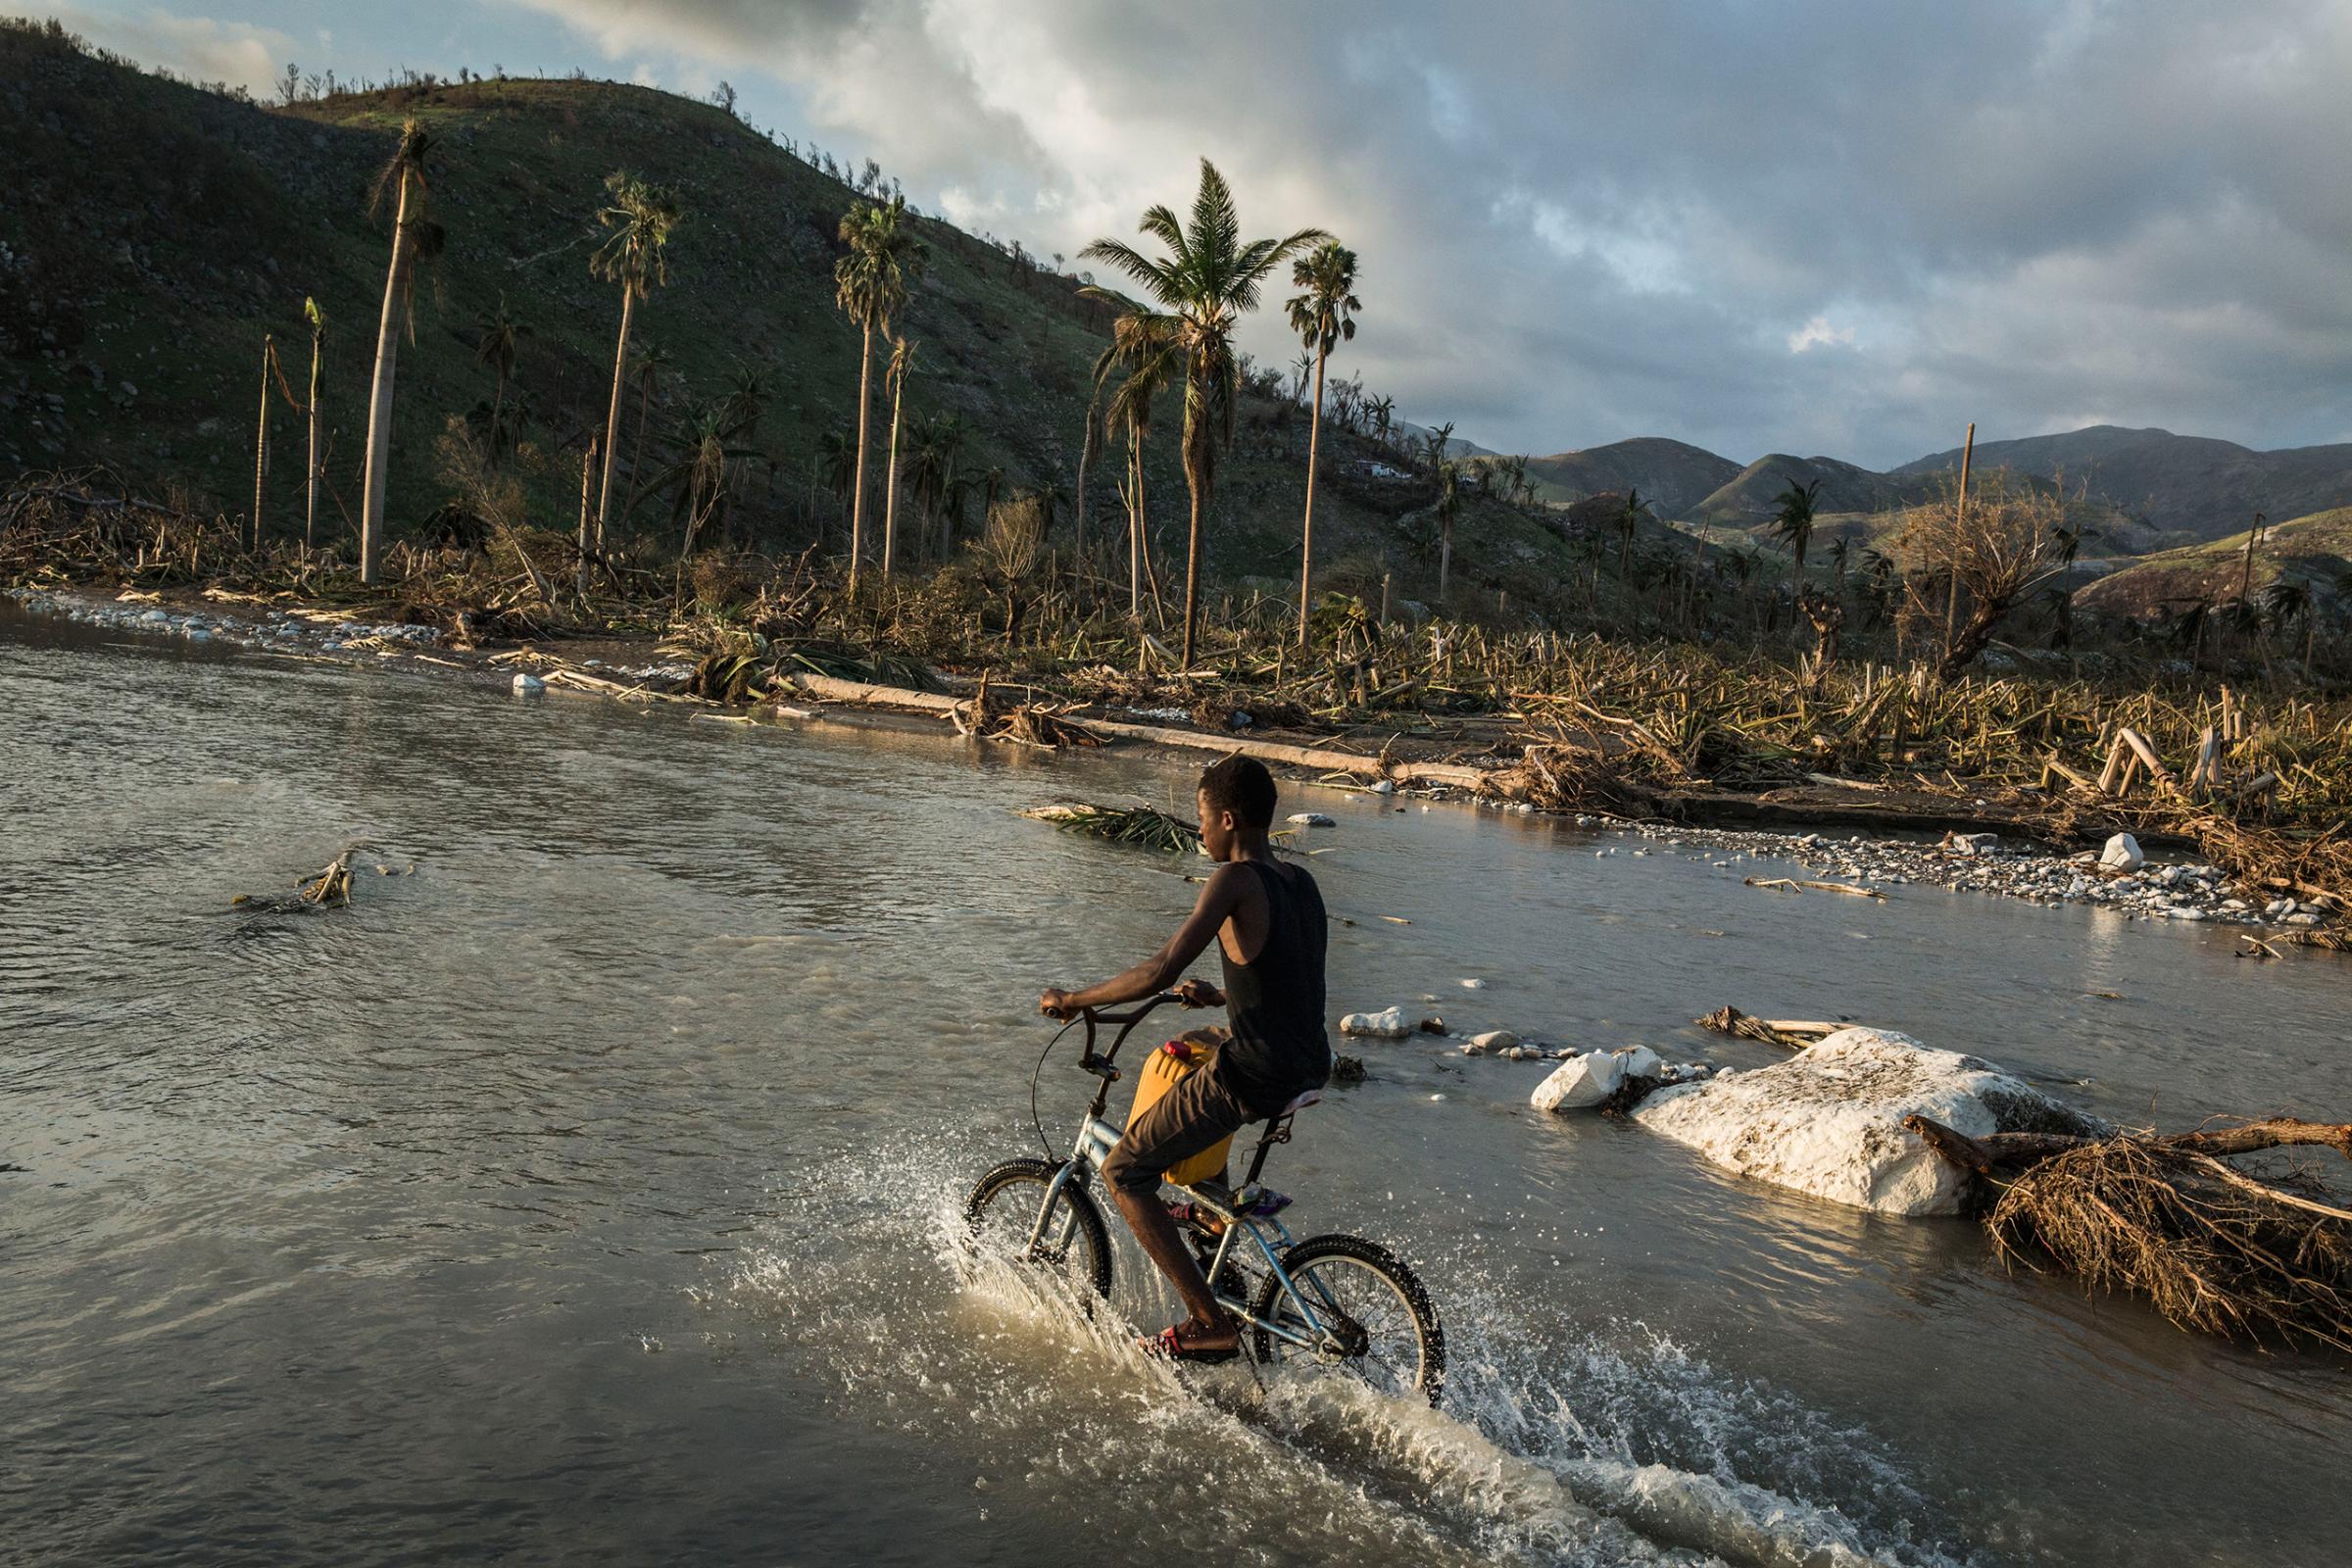 A boy rides his bicycle along a flooded road in a devastated area near Port Salut, in southwestern Haiti, on Oct. 8, 2016.